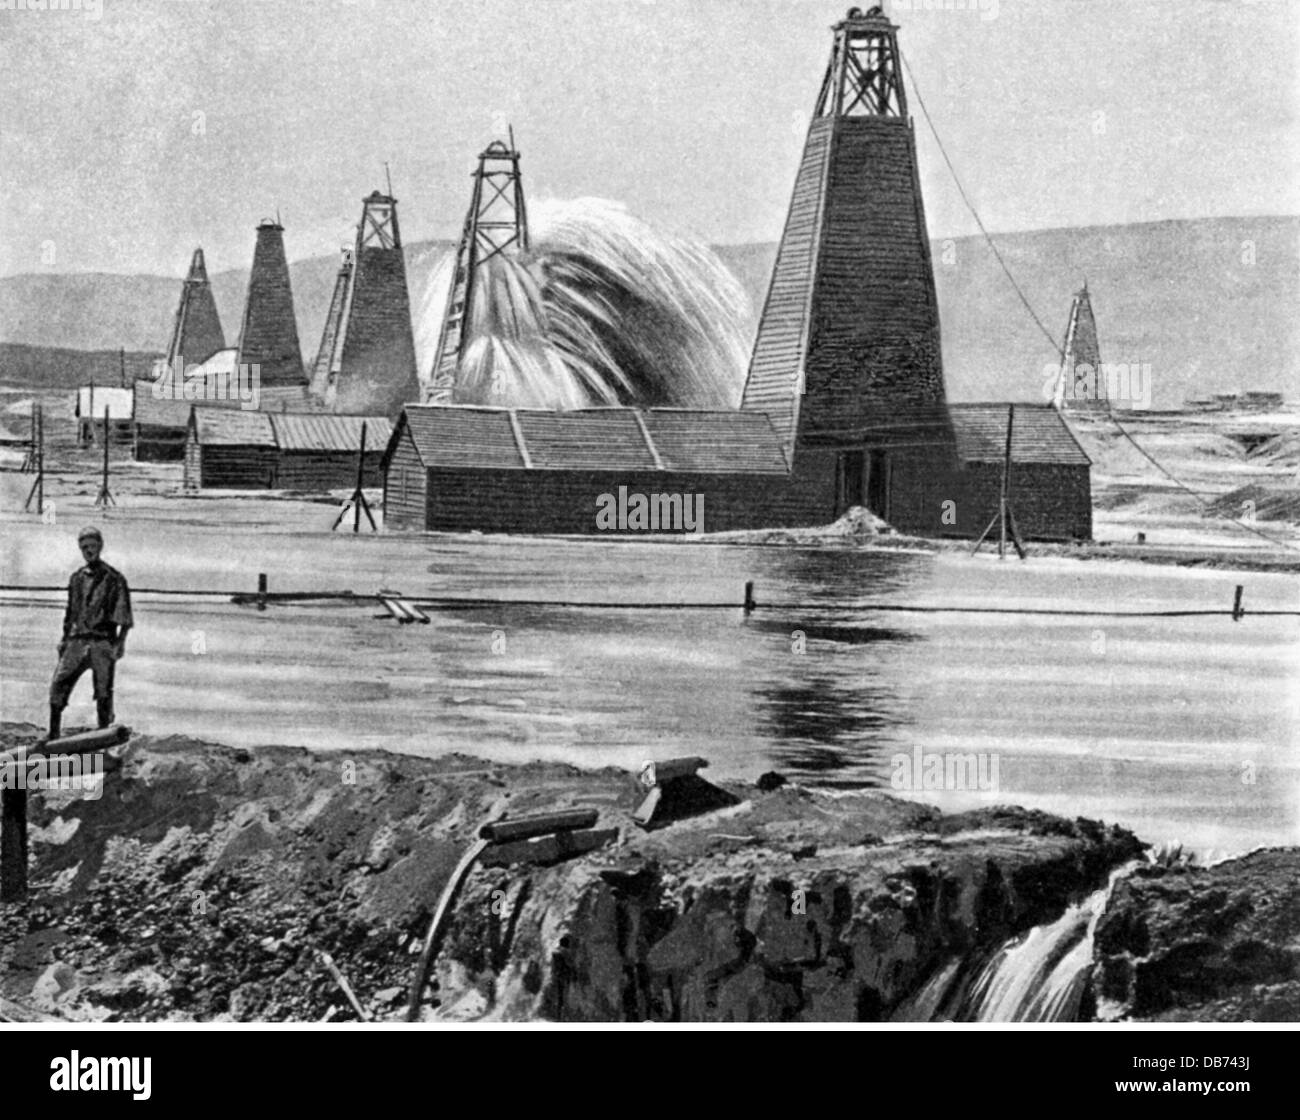 energy, petroleum, oil well, Baku, after a photograph, wood engraving, late 19th century, 19th century, 20th century, Russia, Azerbaijan, crude oil, crude naphtha, raw oil, base oil, rock oil, crude petroleum, oil, resource, raw material, raw materials, crude materials, historic, historical, Baki, Bakou, compressure, compression, pression, thrust, fountain, fountains, drilling derrick, wellhead, boring tower, boring trestle, drill tower, drill rig, drilling derricks, wellheads, boring towers, boring trestles, drill towers, drill rigs, people, Additional-Rights-Clearences-Not Available Stock Photo